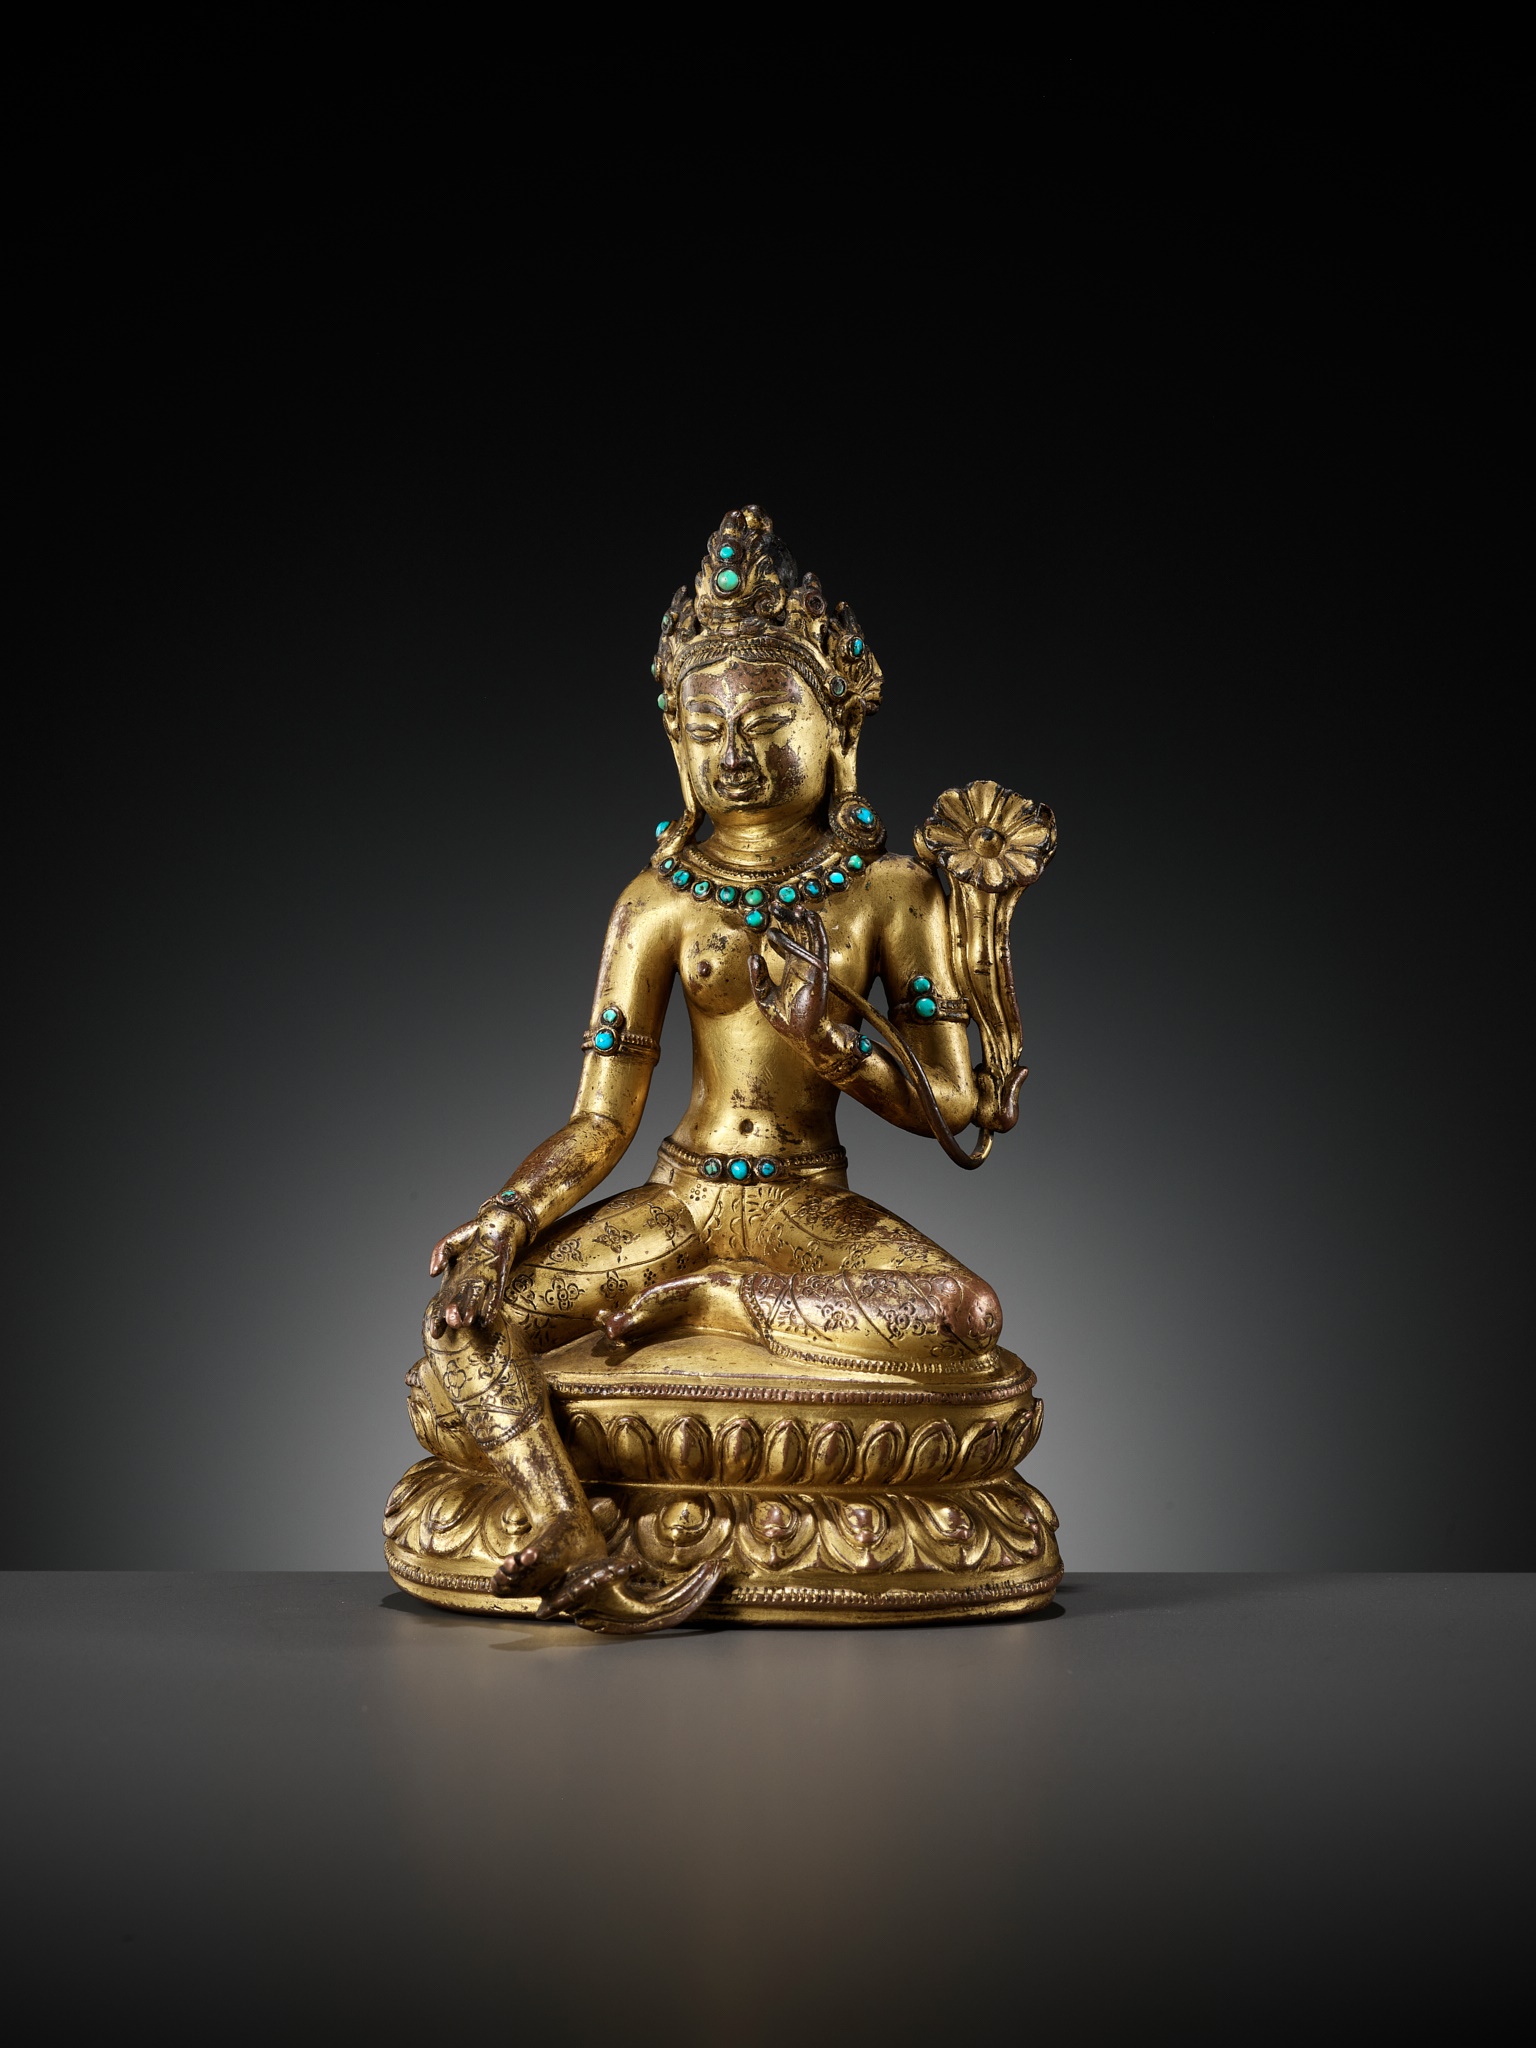 A GILT AND TURQUOISE-INLAID COPPER ALLOY FIGURE OF GREEN TARA, DENSATIL STYLE, TIBET, 14TH CENTURY - Image 14 of 16